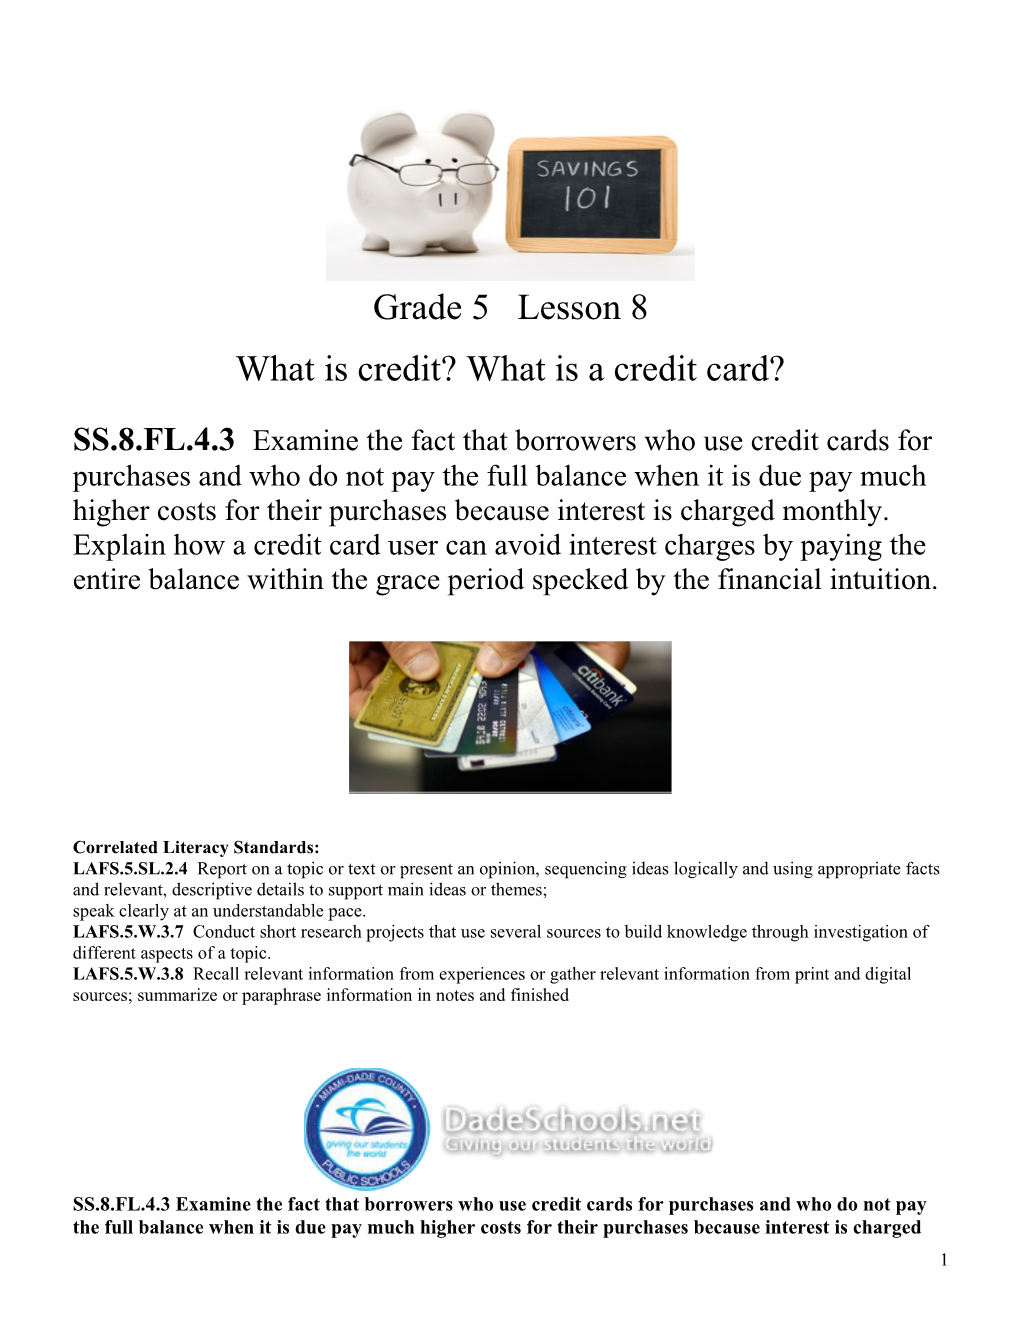 What Is Credit? What Is a Credit Card?